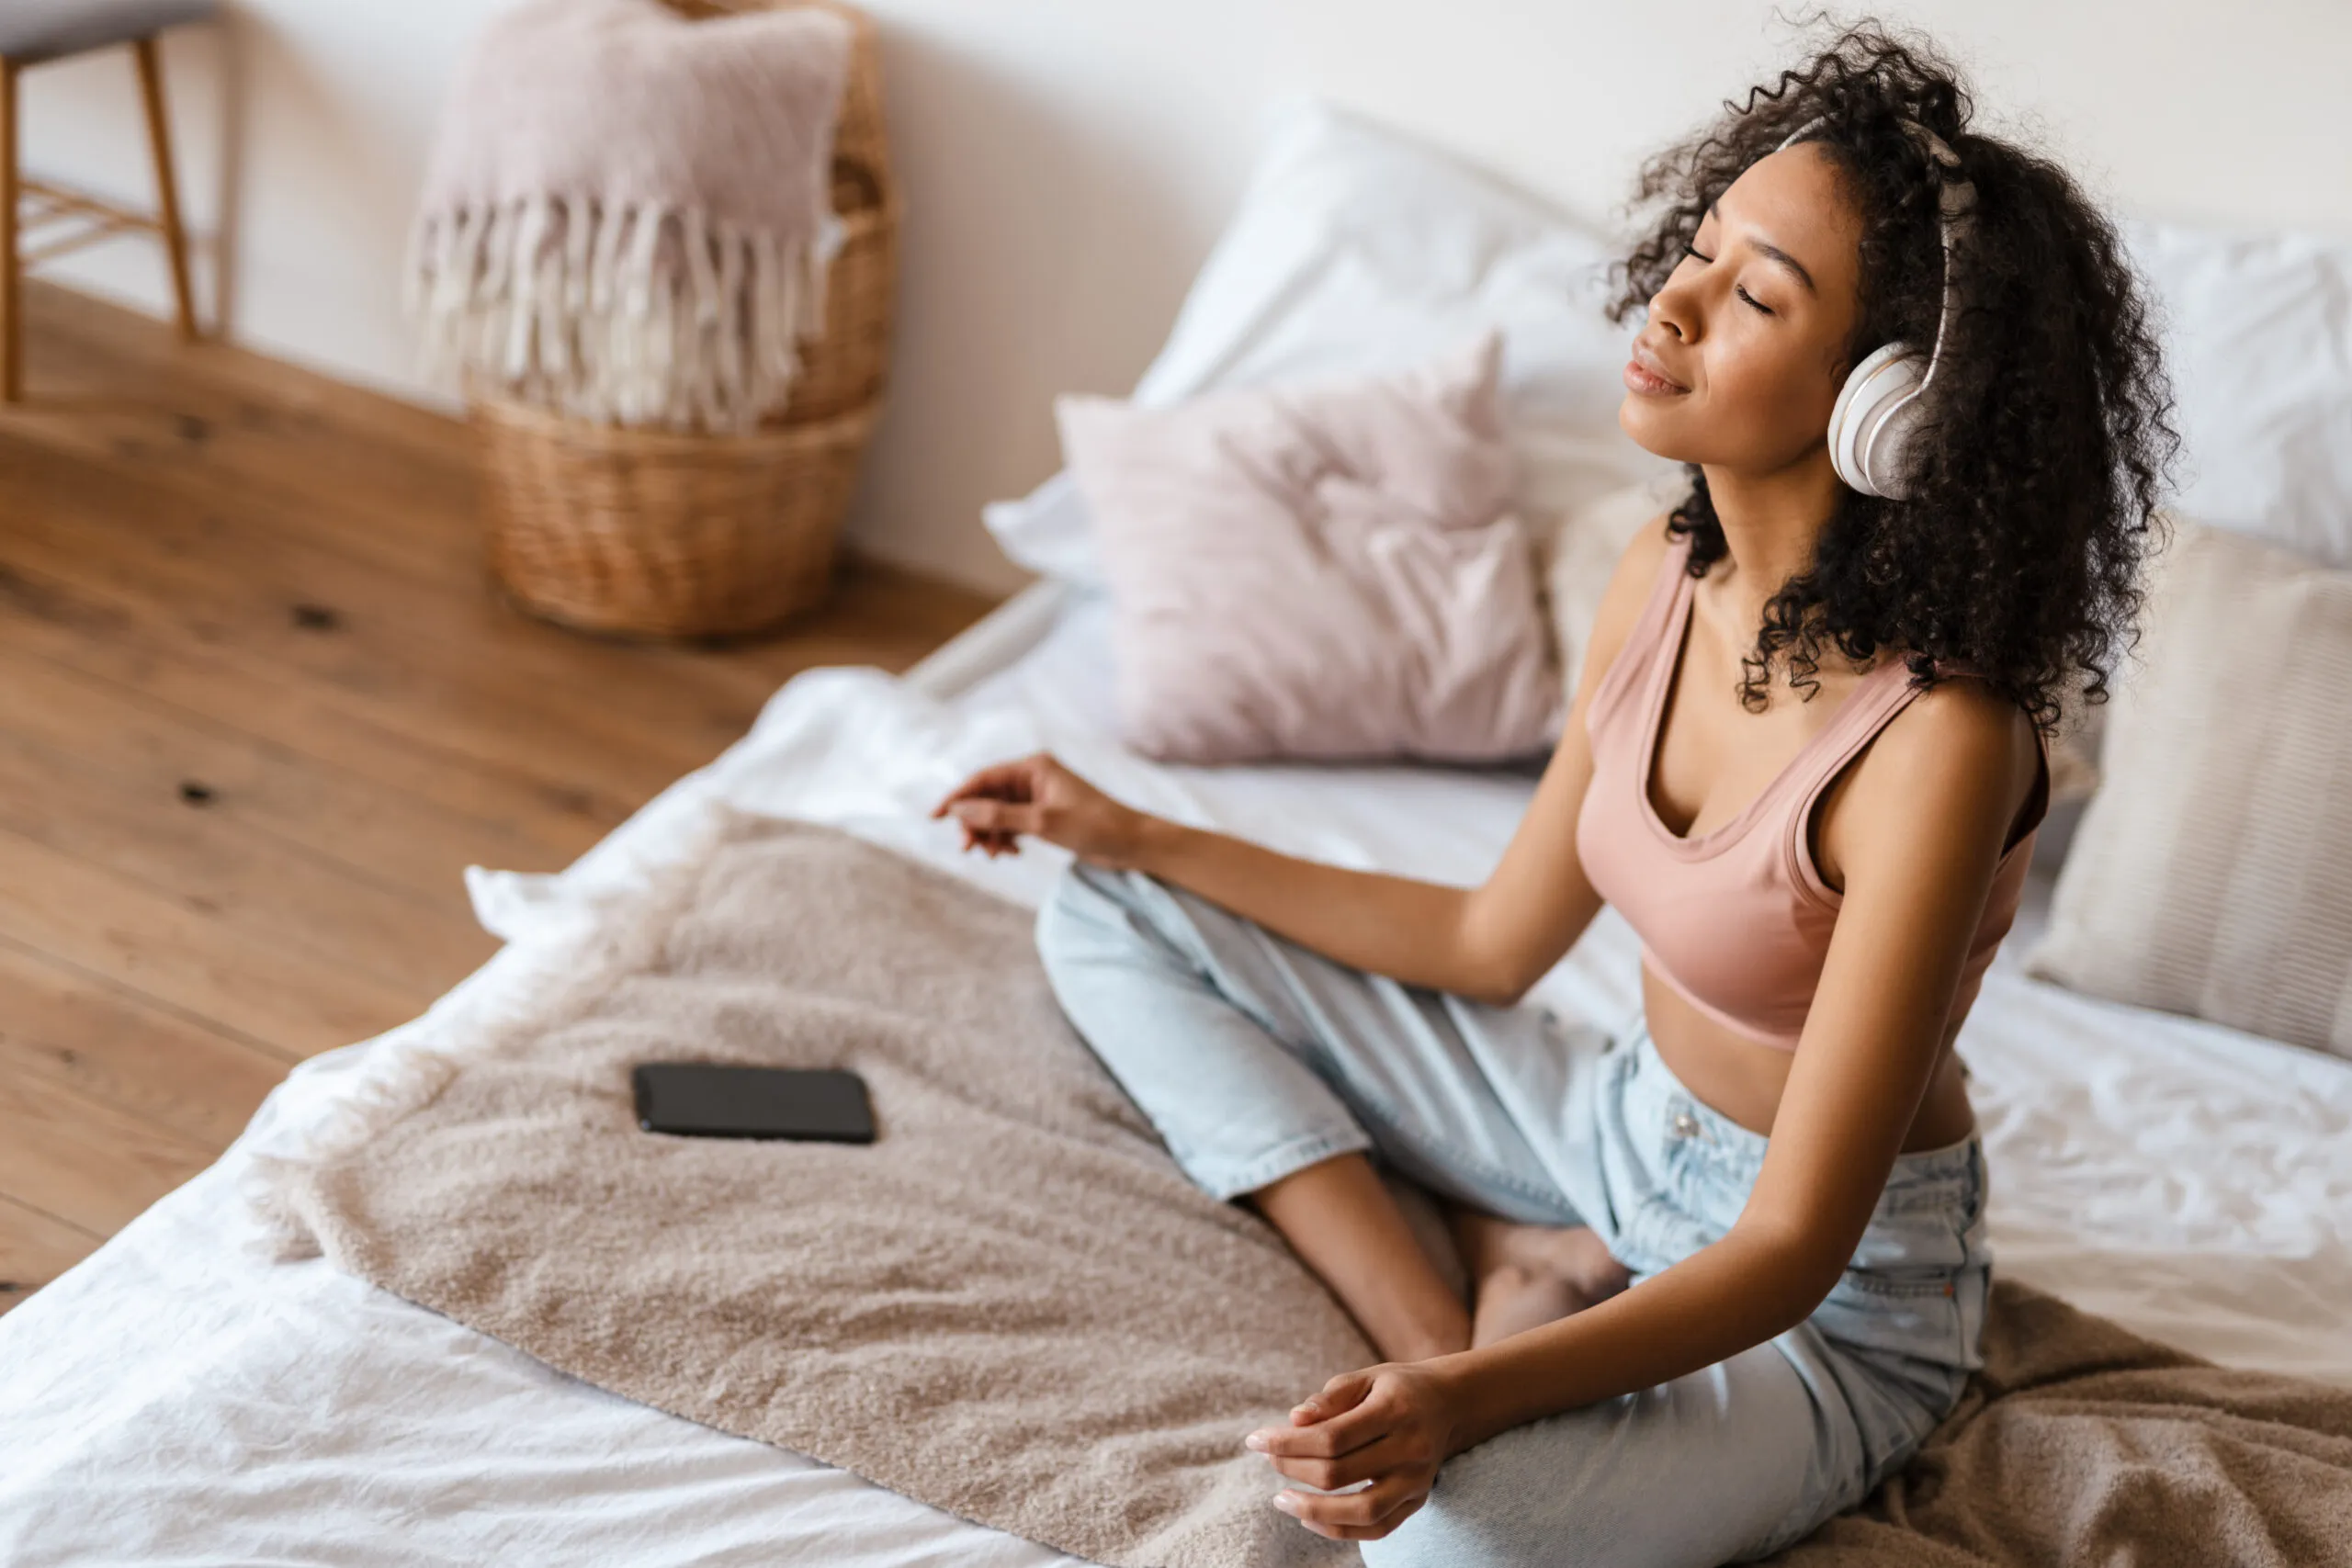 Mindfulness, Meditation and Self-Compassion — A Clinical Psychologist Explains How These Science-Backed Practices Can Improve Mental Health